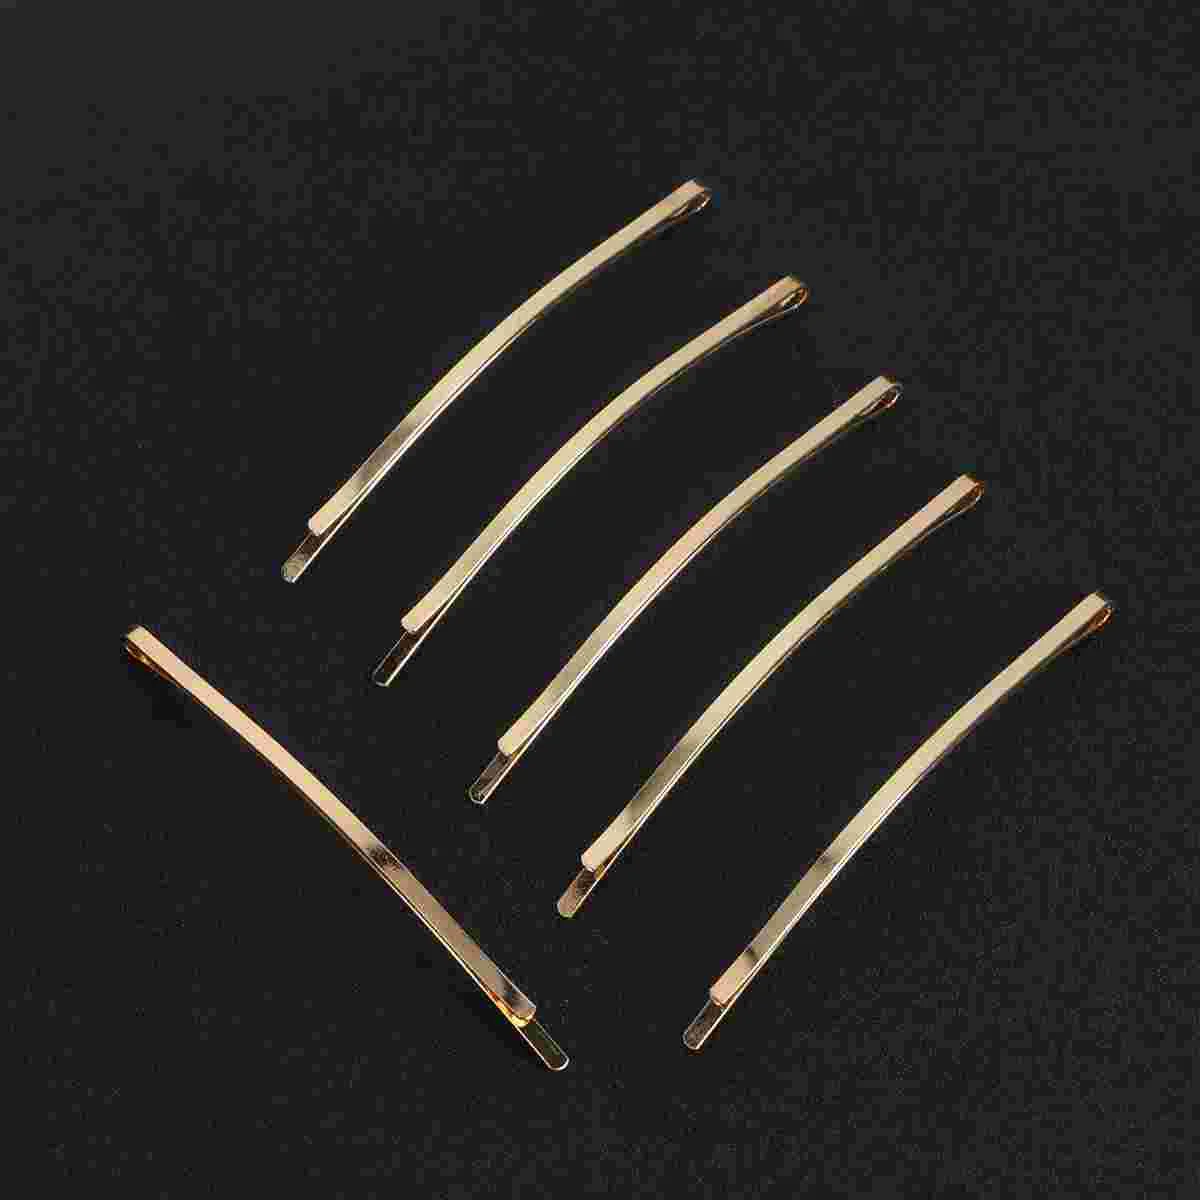 100 PCS Decorative Accessories Women Girls Bobby Thick Hair Wedding Metal Barrette Ornaments Hairpin Clip